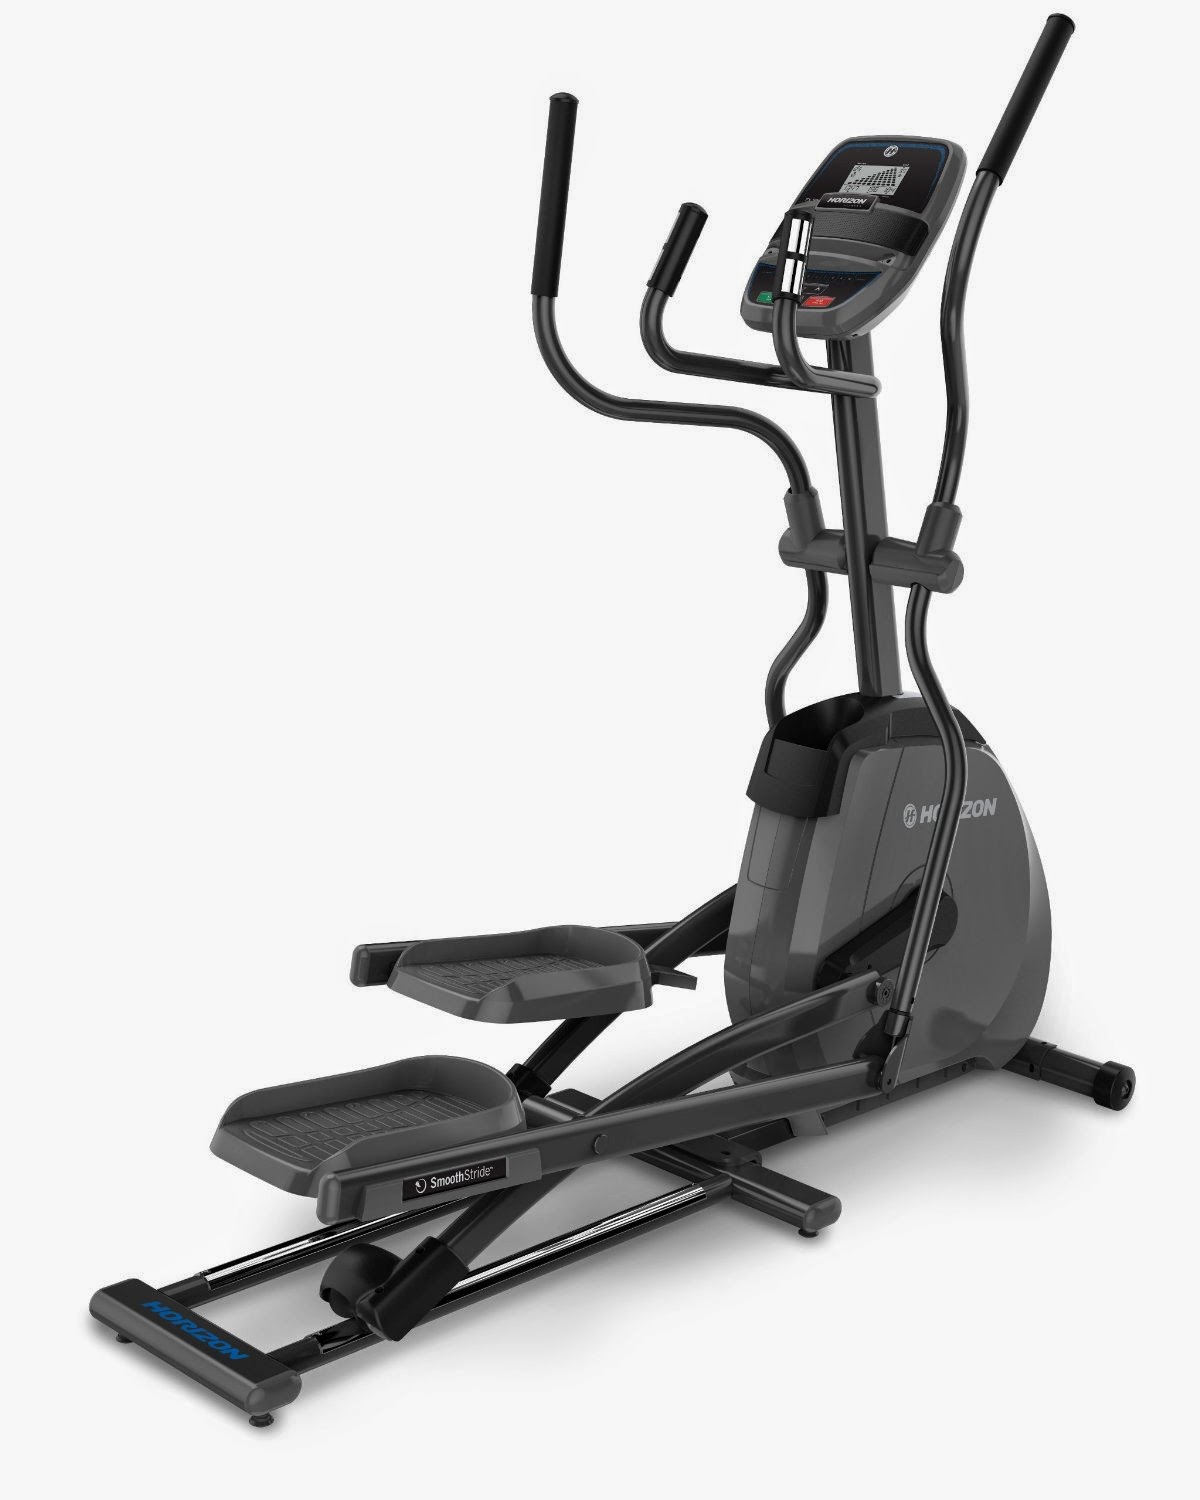 Horizon Fitness EX 59 2 Elliptical Trainer, review features & compare differences with EX 69 2